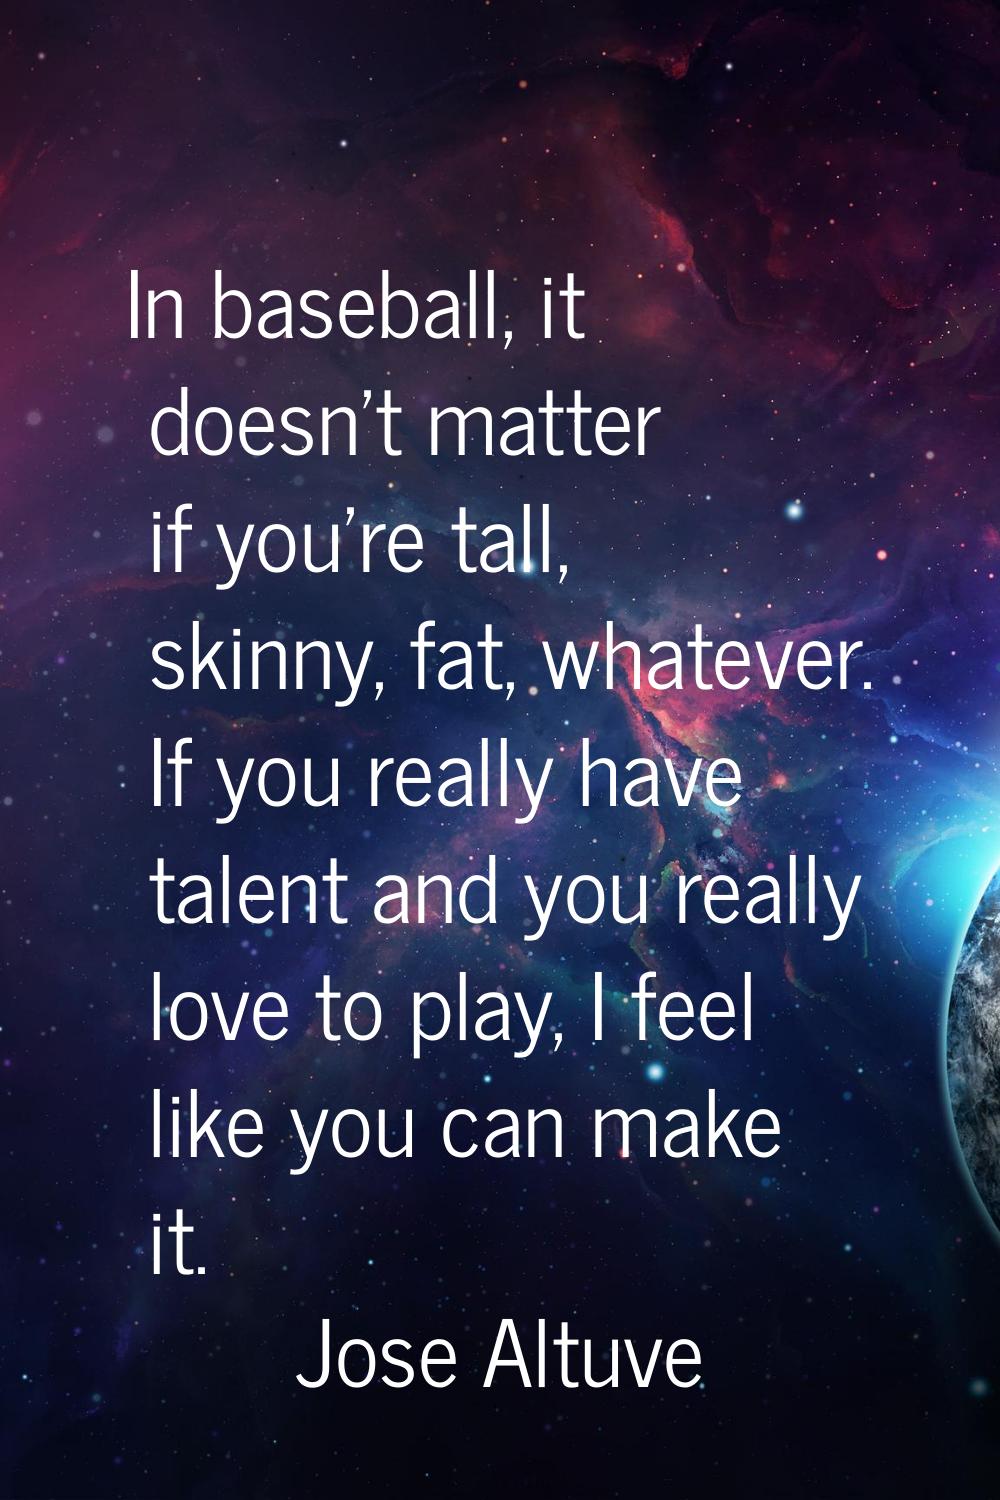 In baseball, it doesn't matter if you're tall, skinny, fat, whatever. If you really have talent and